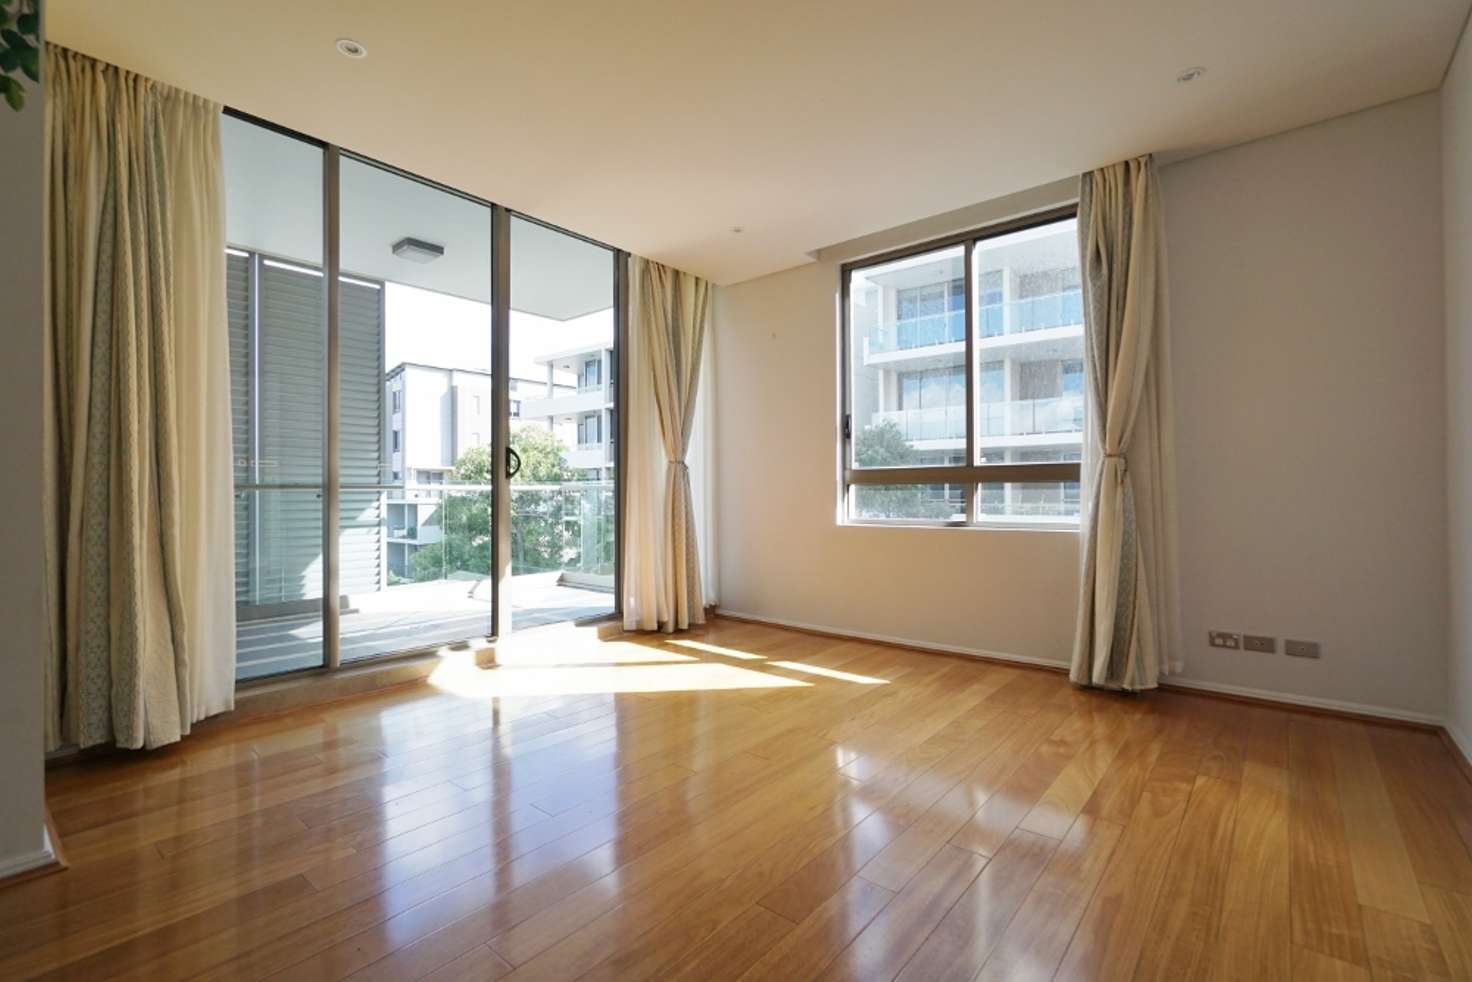 Main view of Homely apartment listing, 102/29 Seven Street, Epping NSW 2121